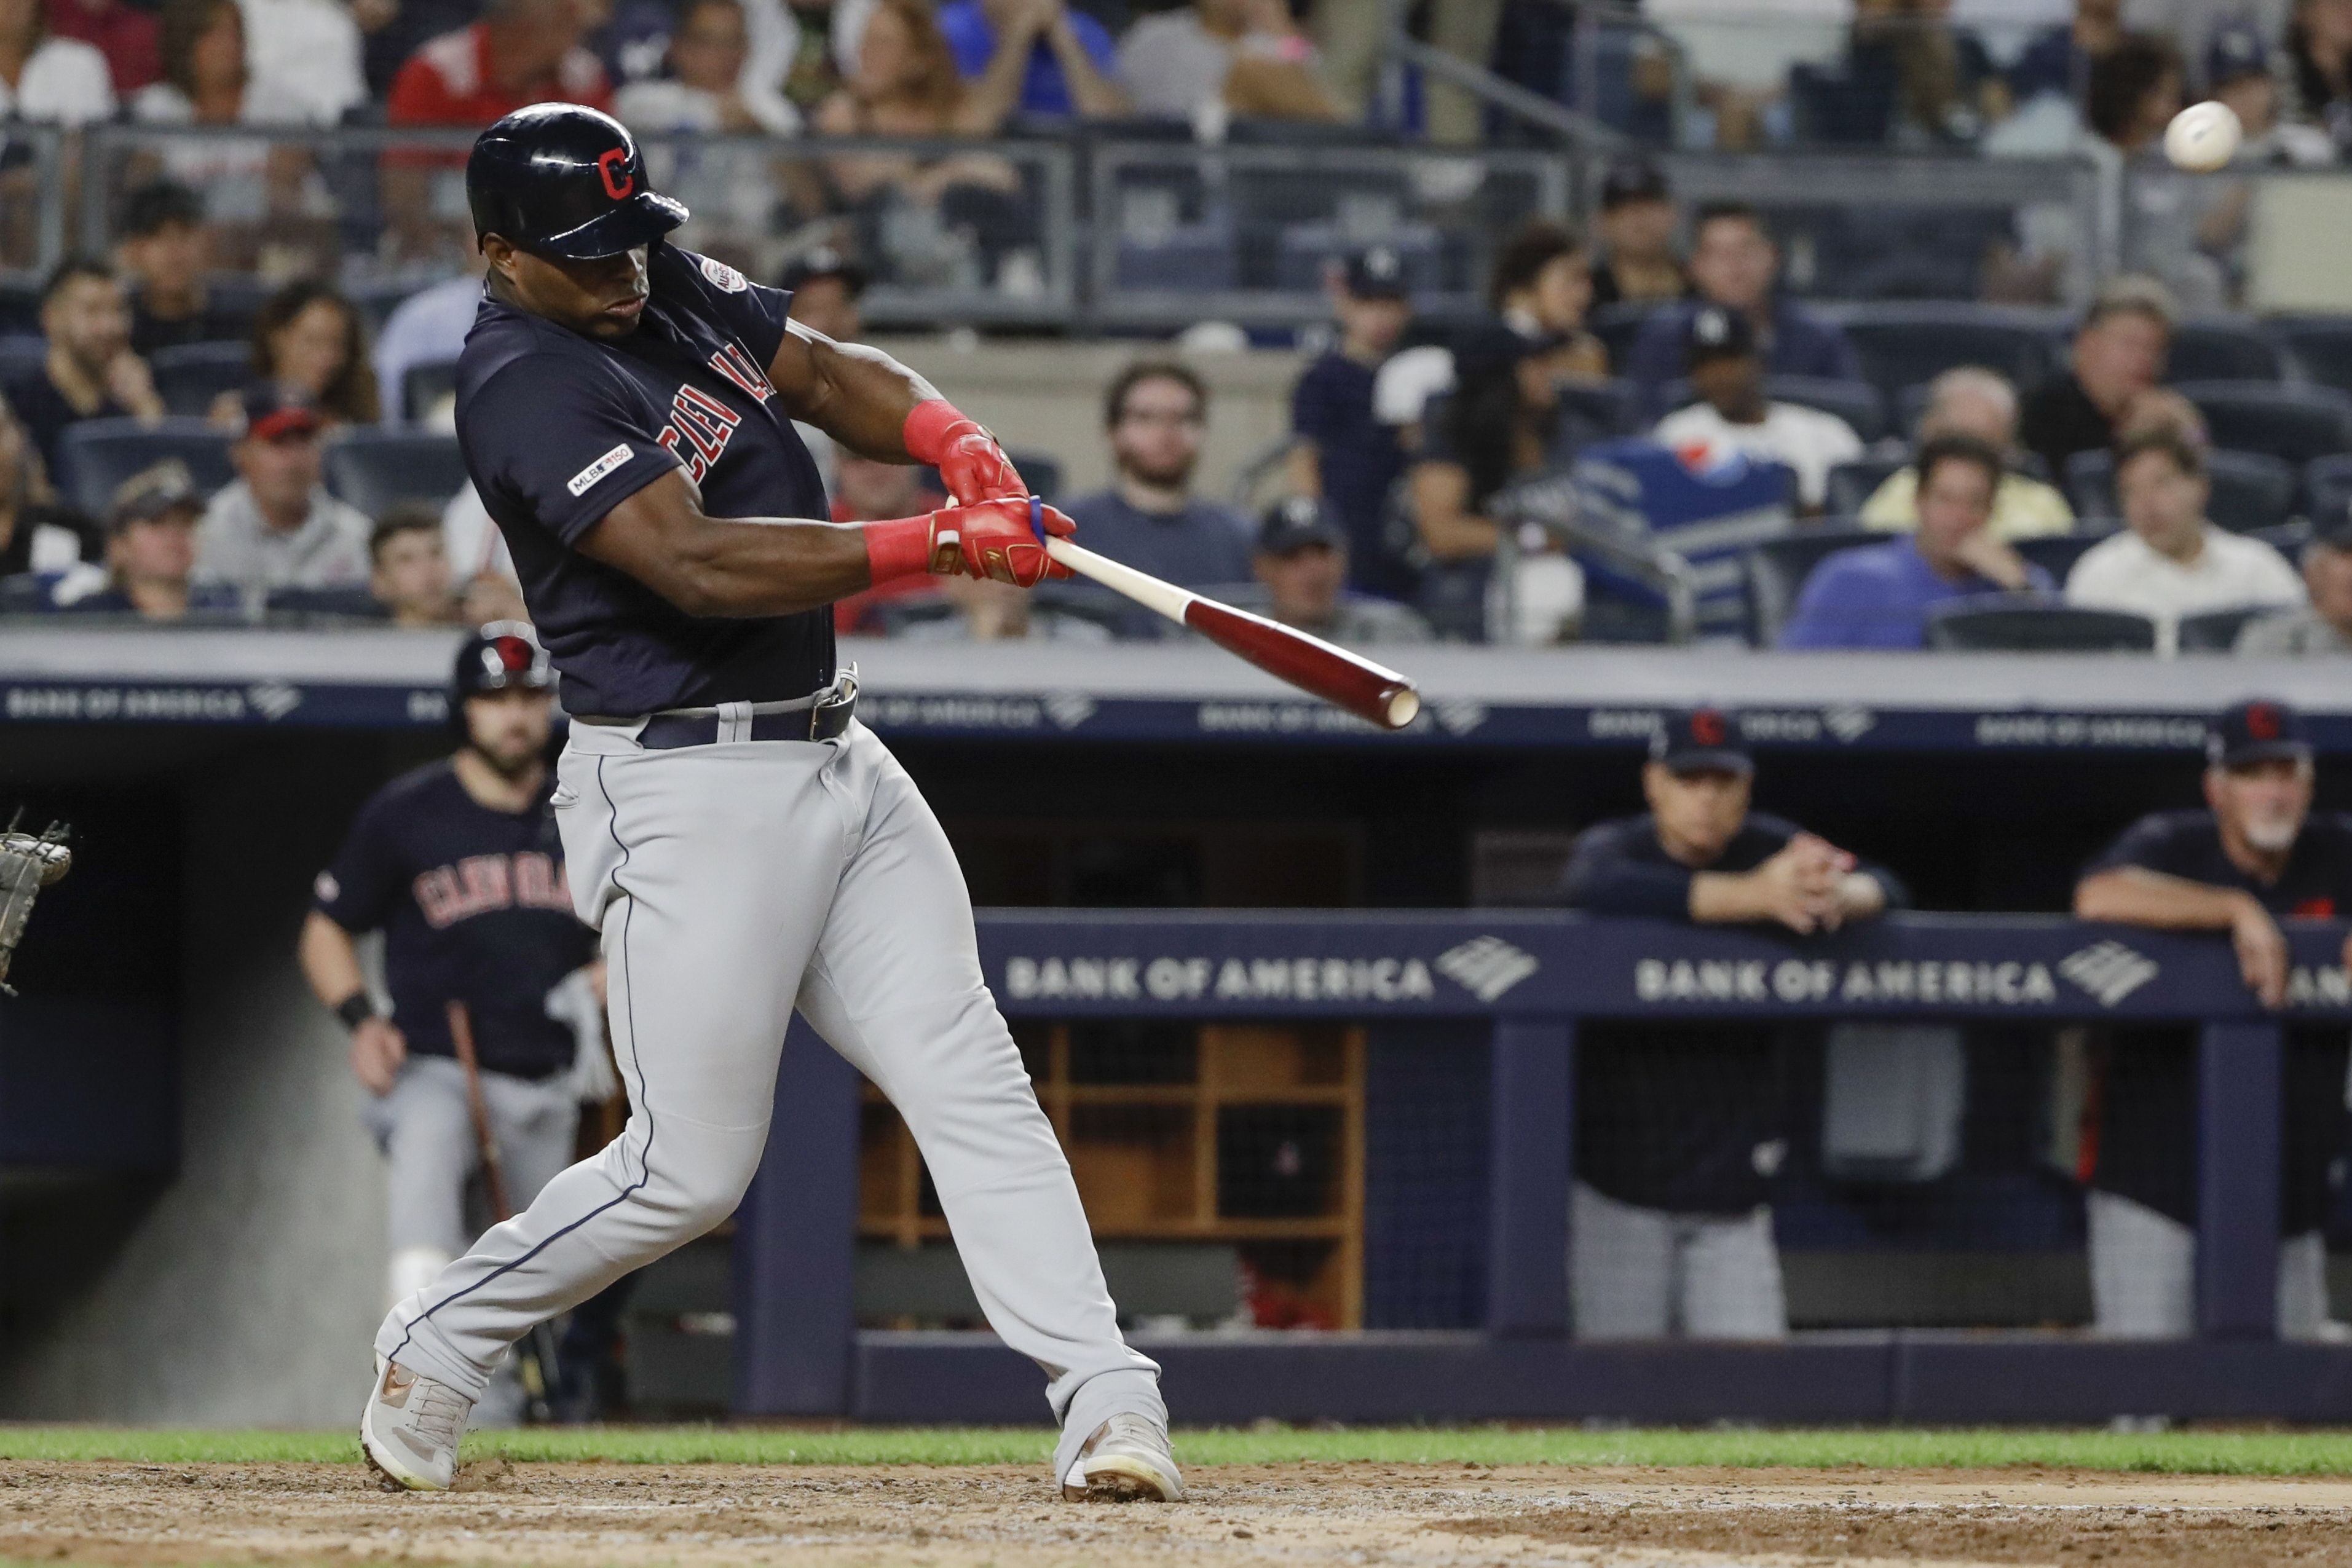 Cleveland Indians right fielder Yasiel Puig: “I don't know why